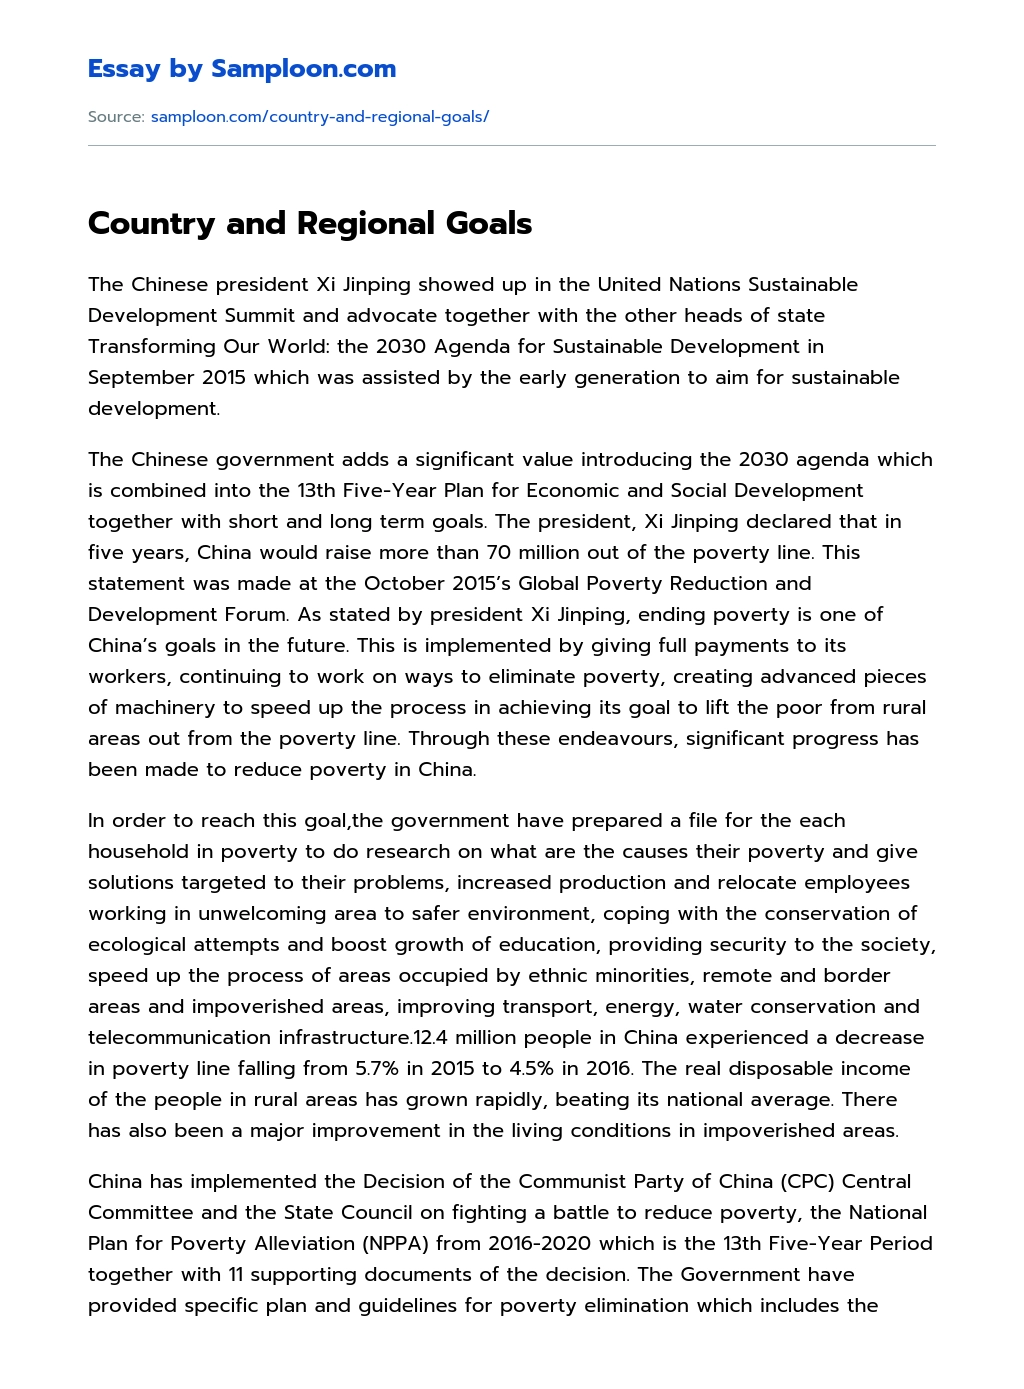 Country and Regional Goals essay